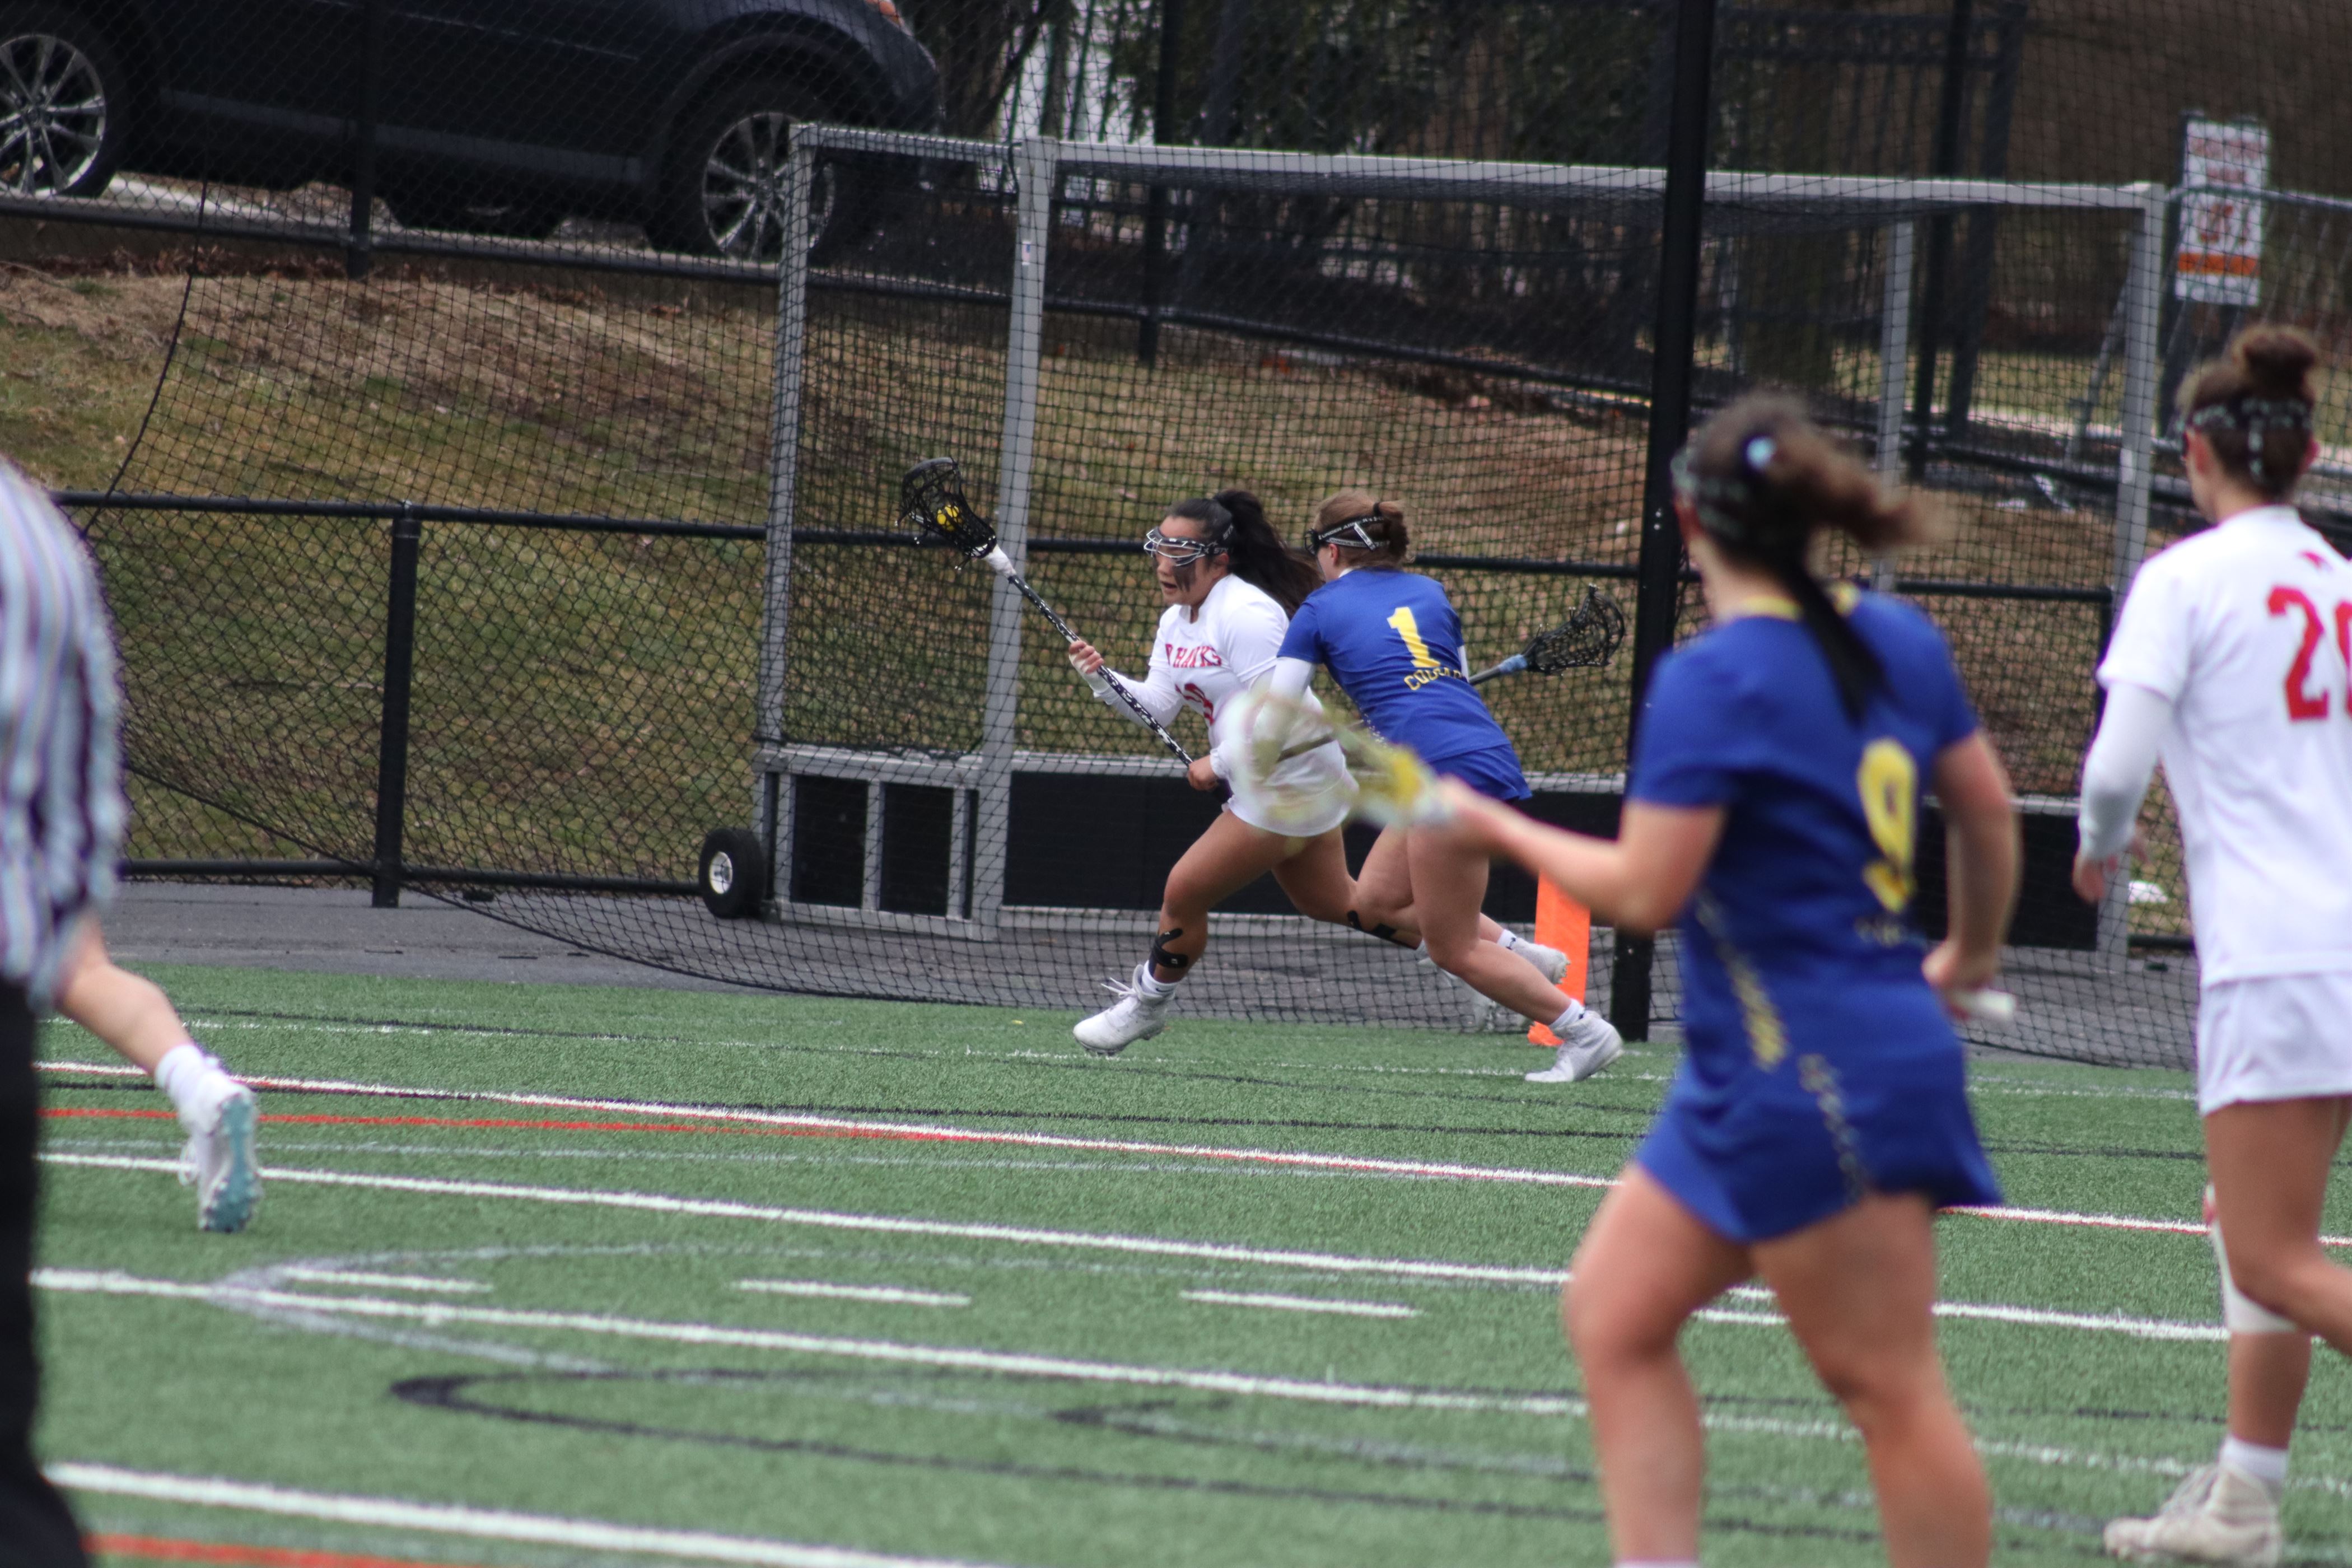 Freshman defender Danielle de Jesus runs with the ball with a Misericordia defender right behind her. Trevor Giesberg | The Montclarion